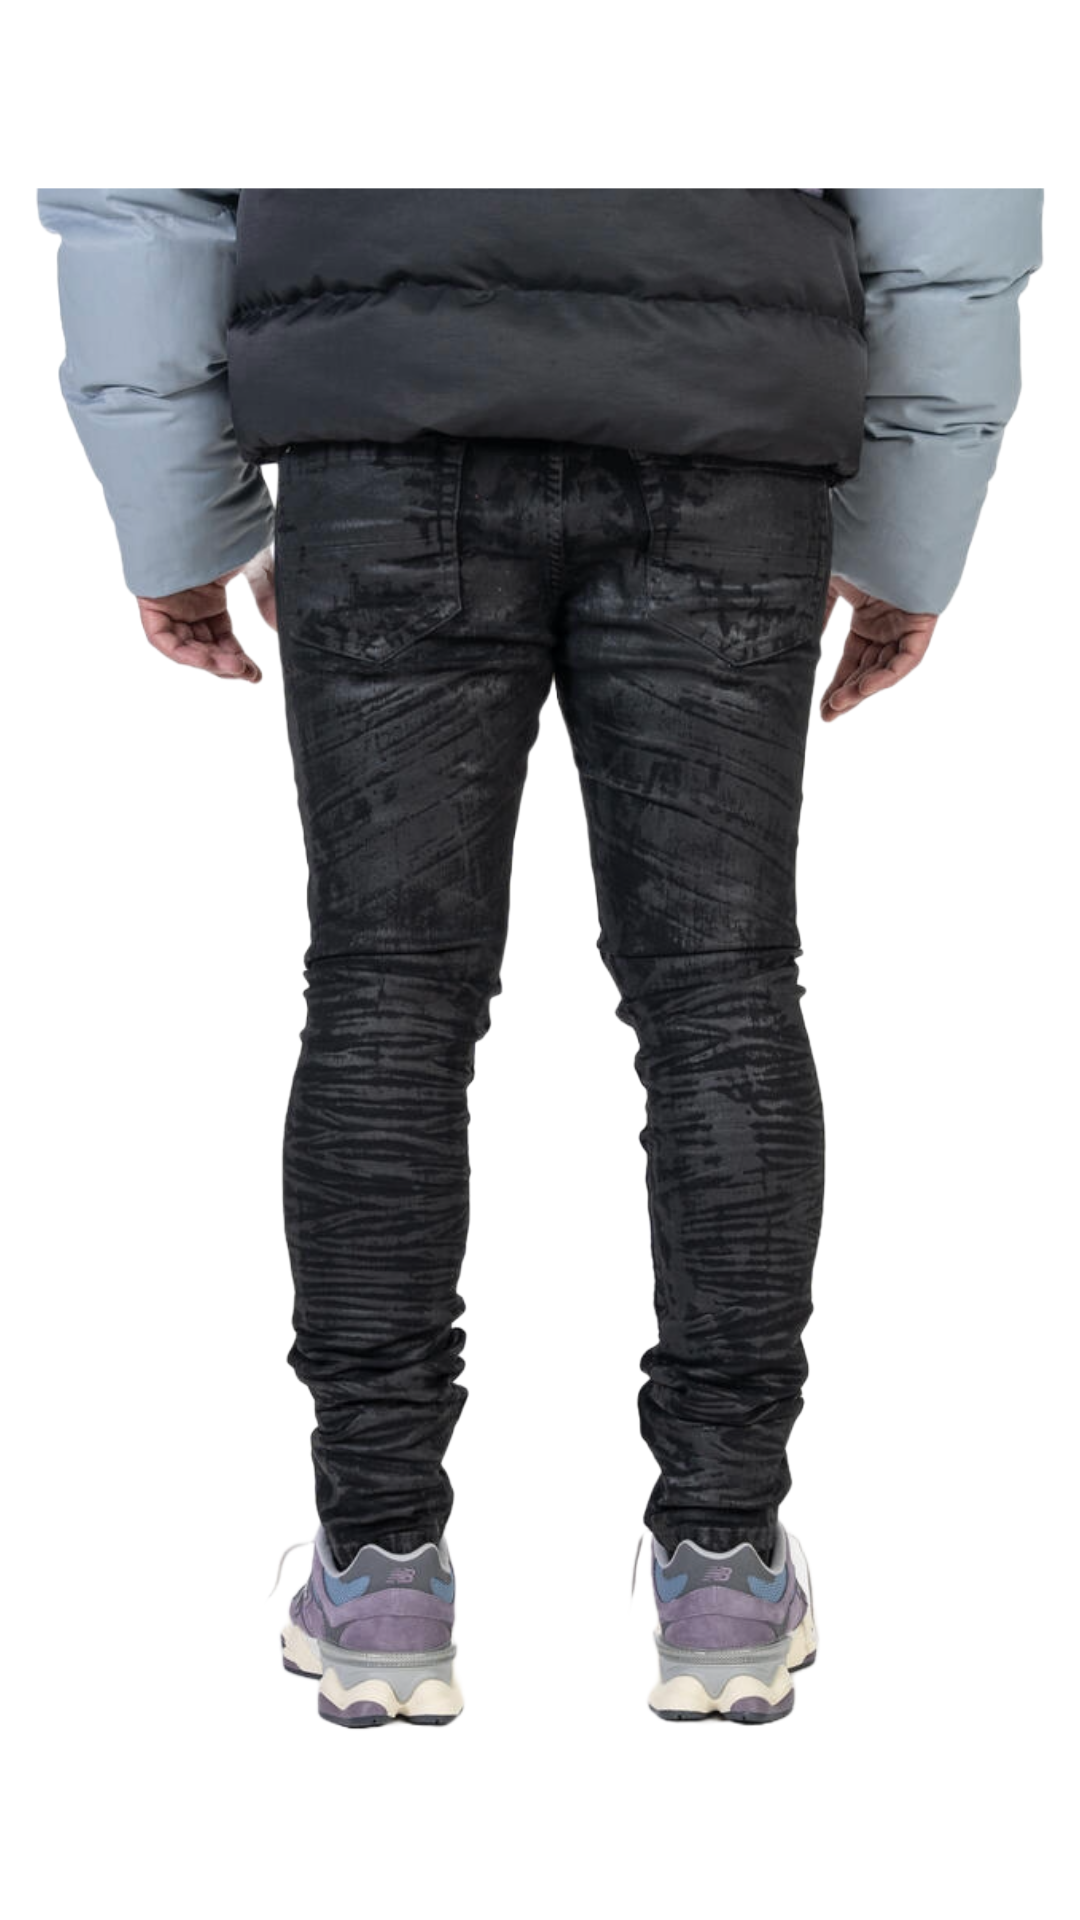 RELAPSE "NO MORE 2.0" JEANS